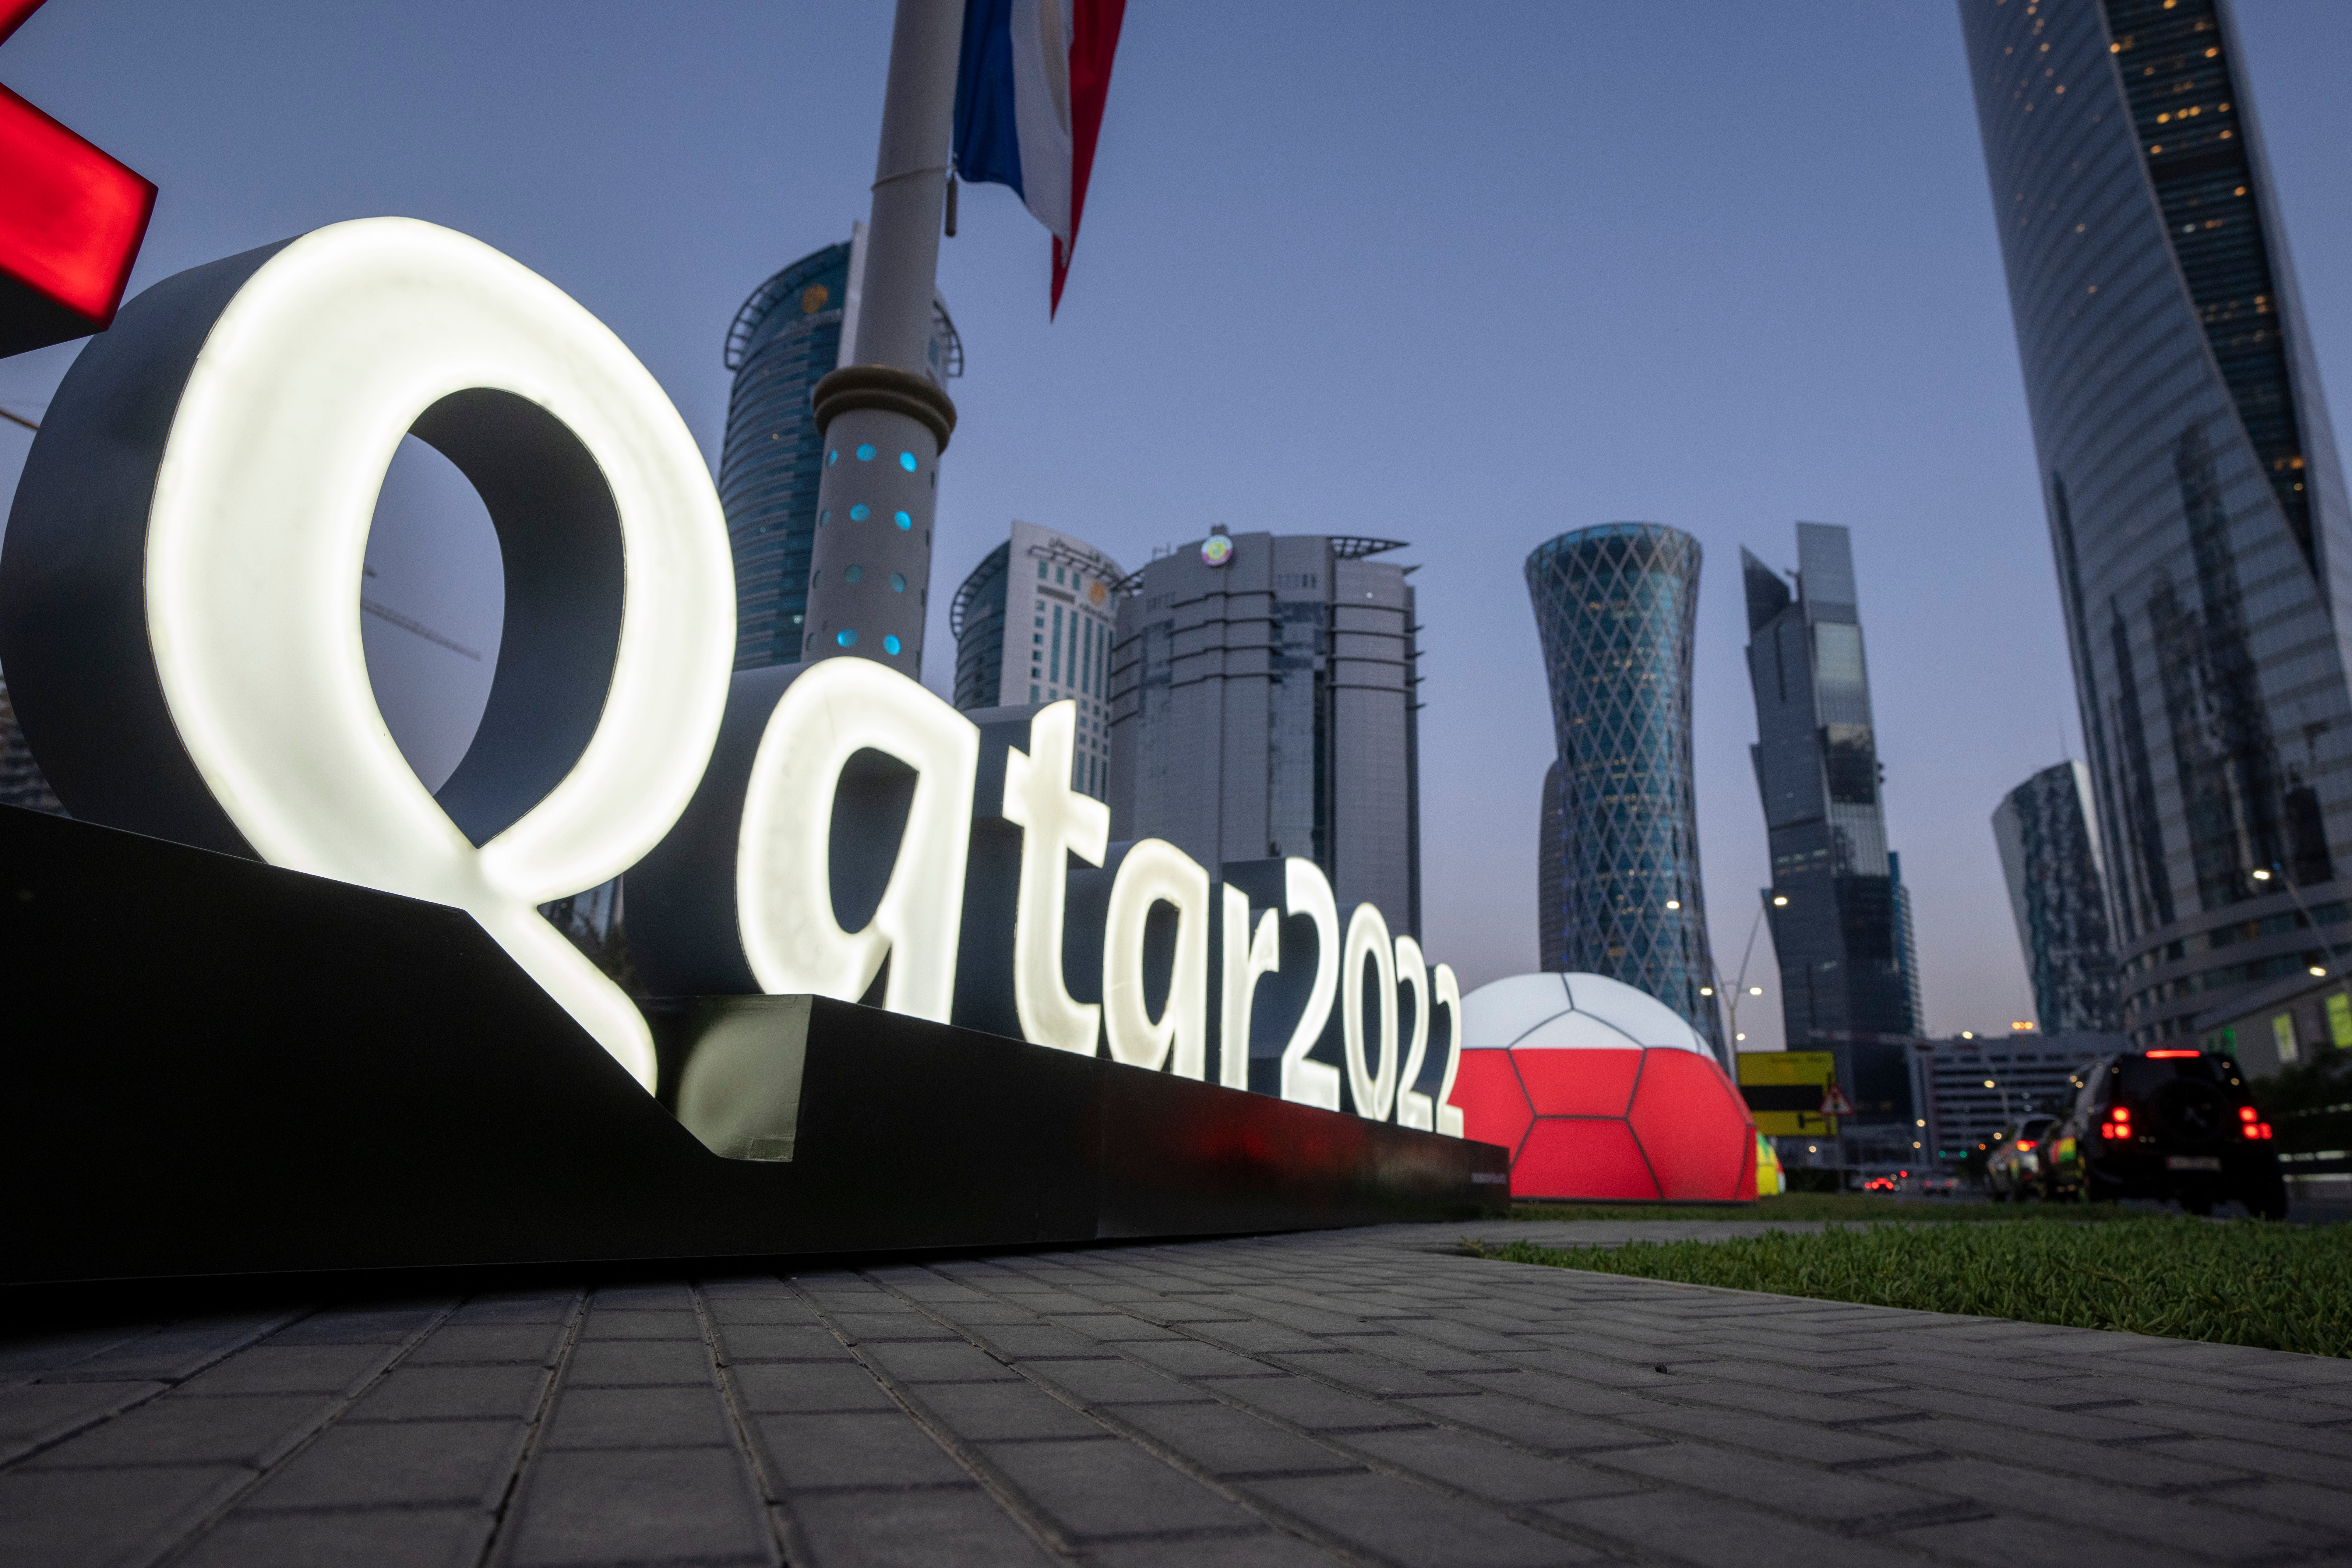 The 2022 World Cup will be taking place in Qatar from November to December